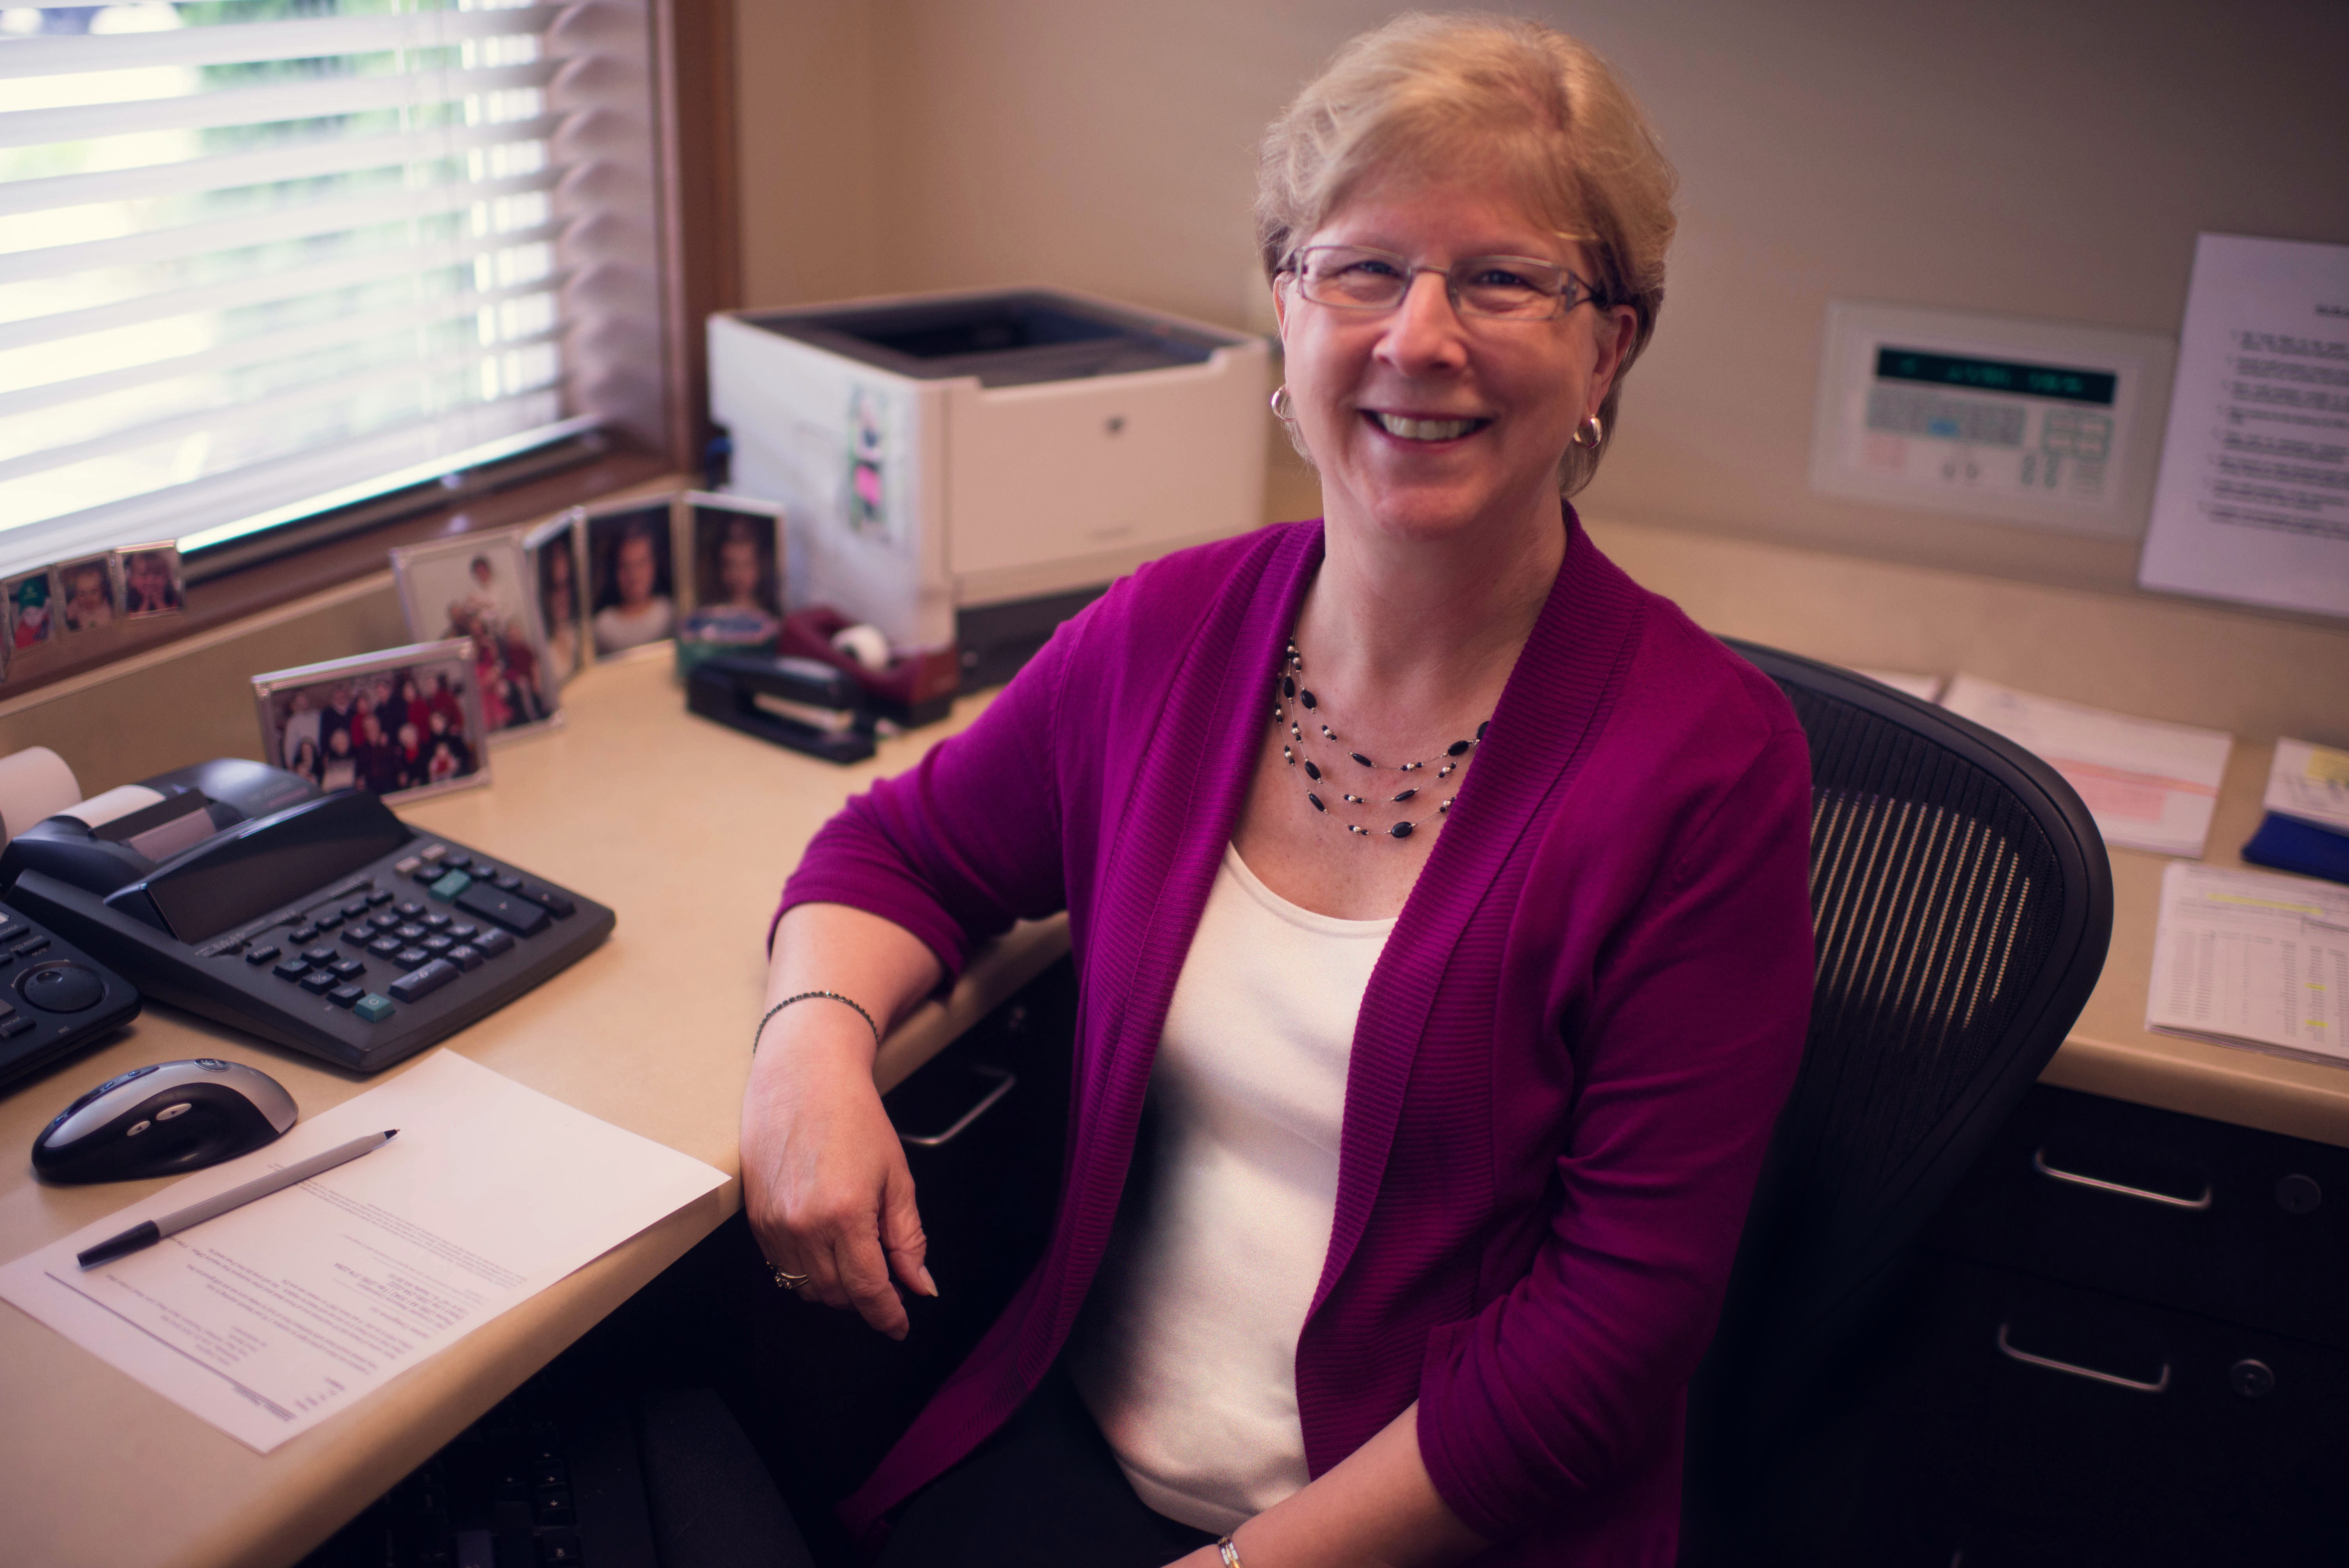 Kathleen, Administrative Staff at the Center for Endodontics